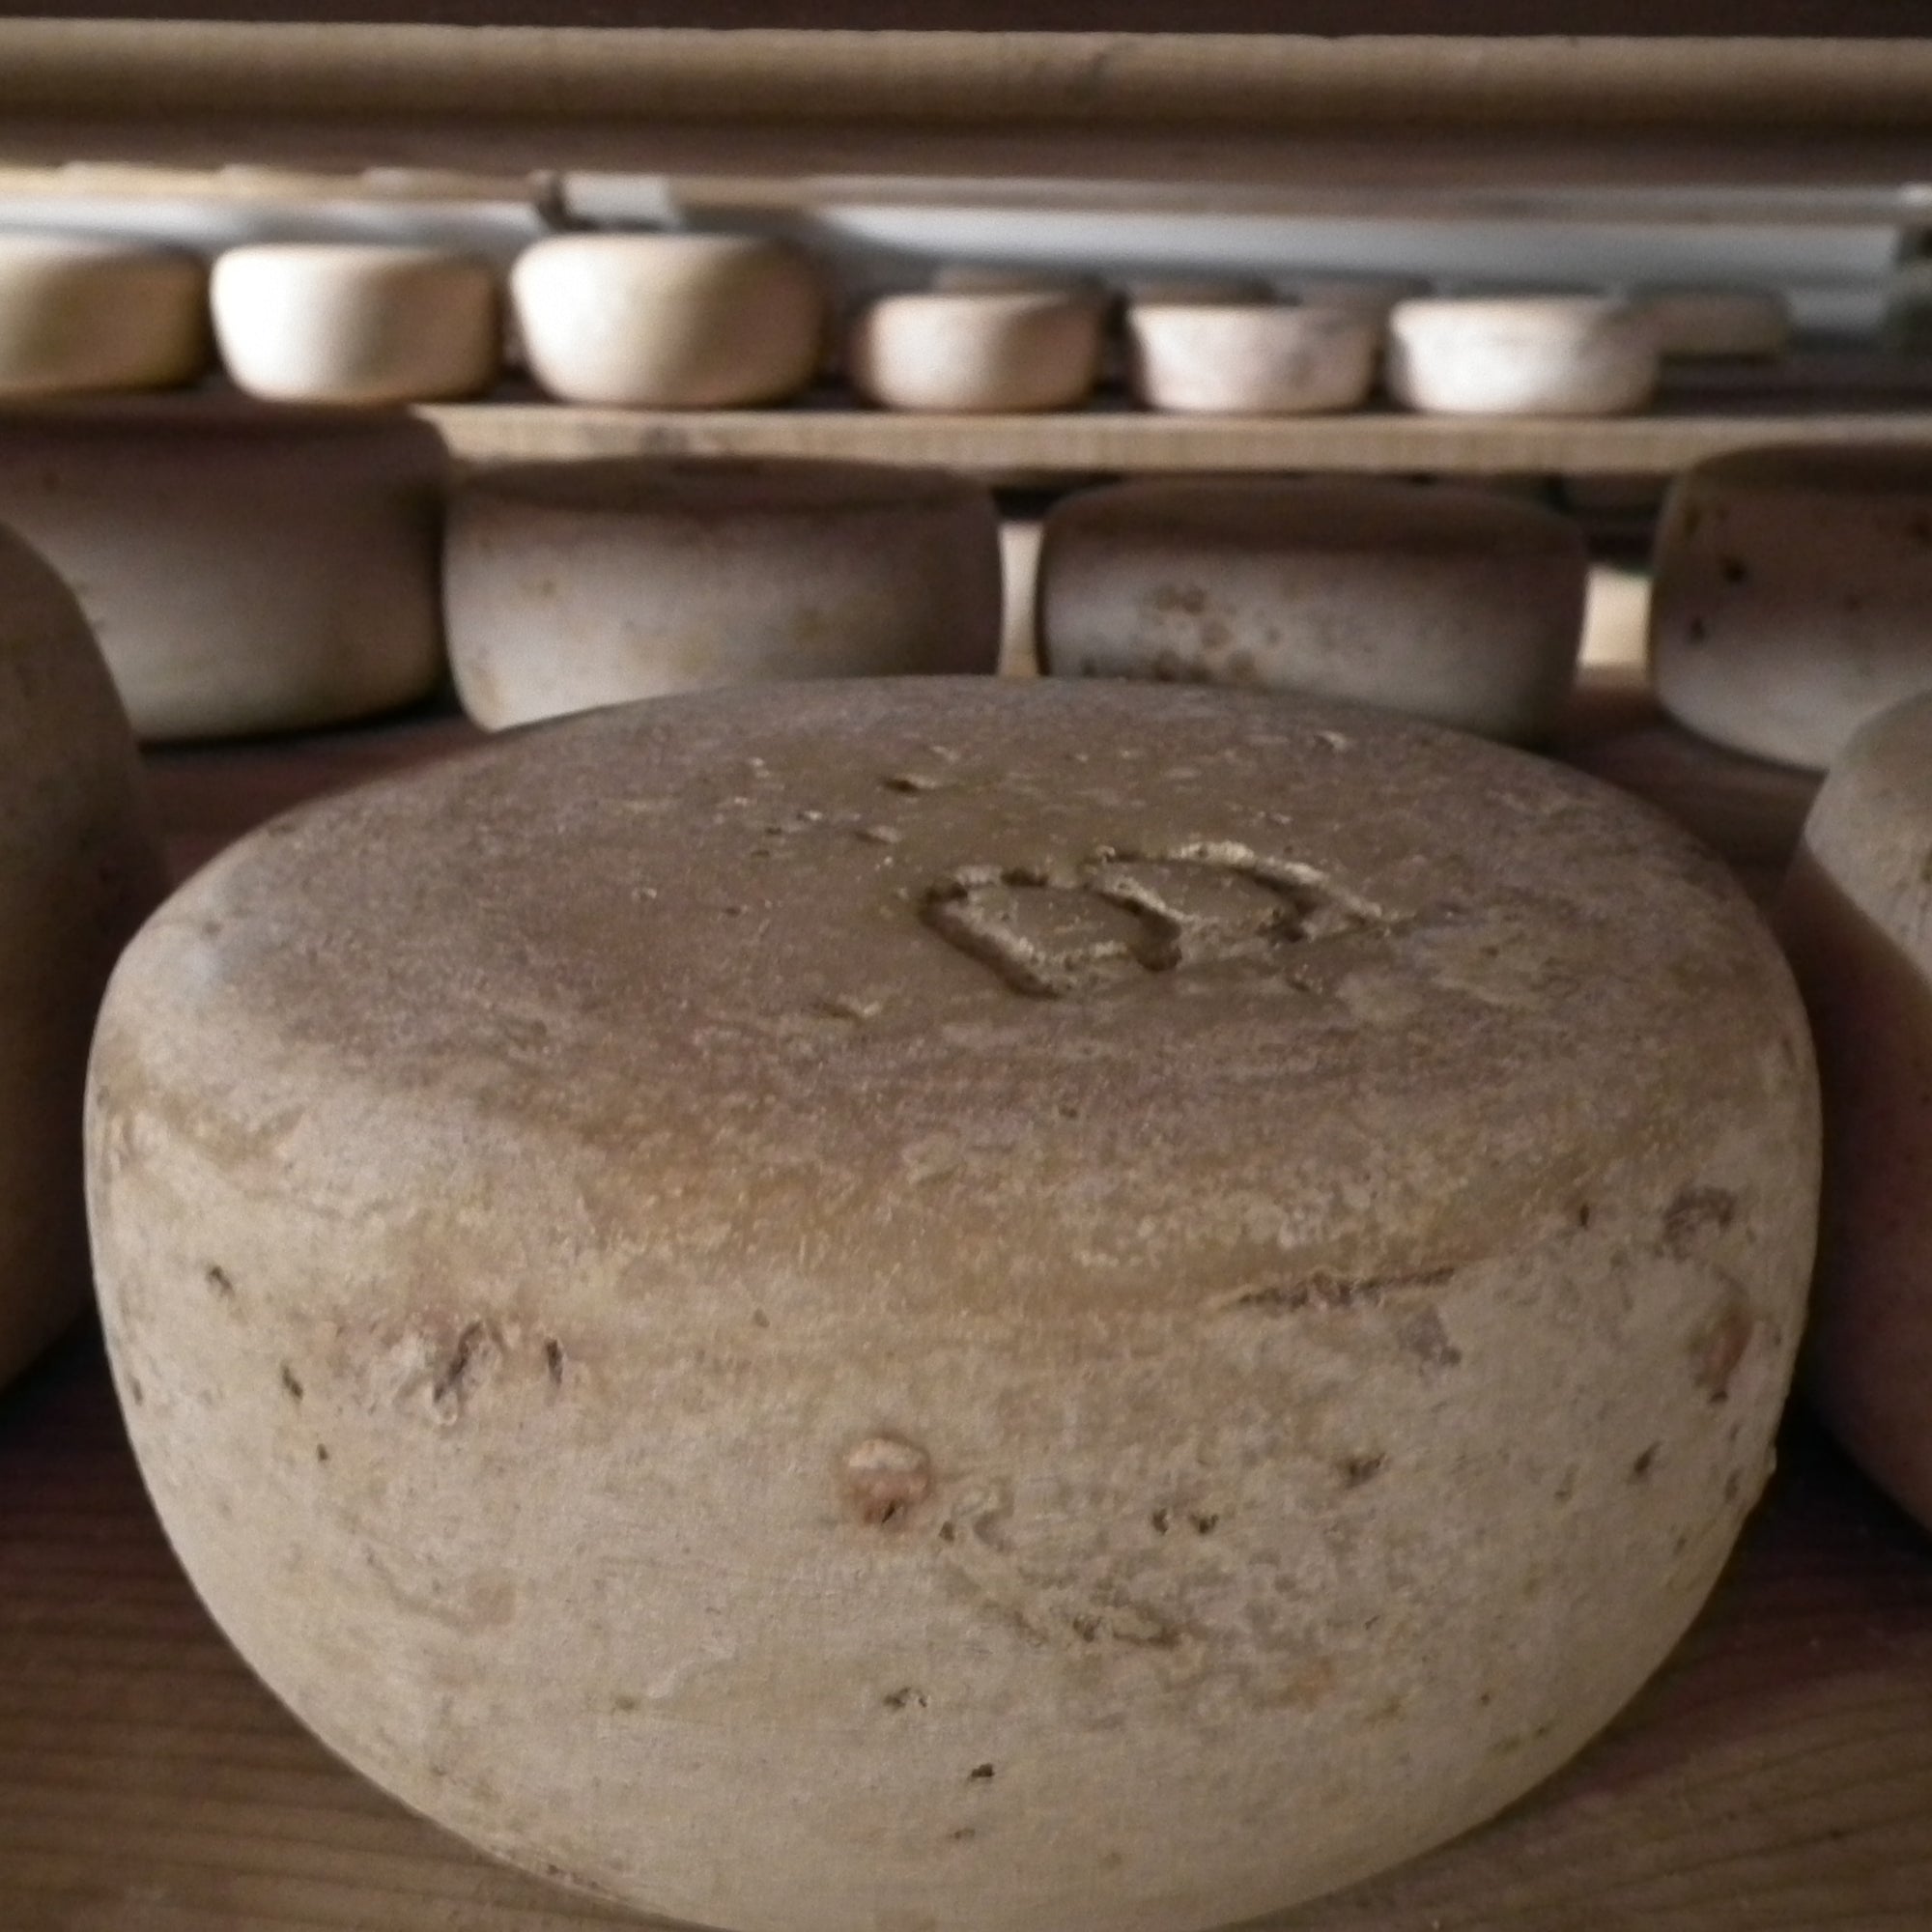 Wheels of artisan cheese carefully laid out to mature